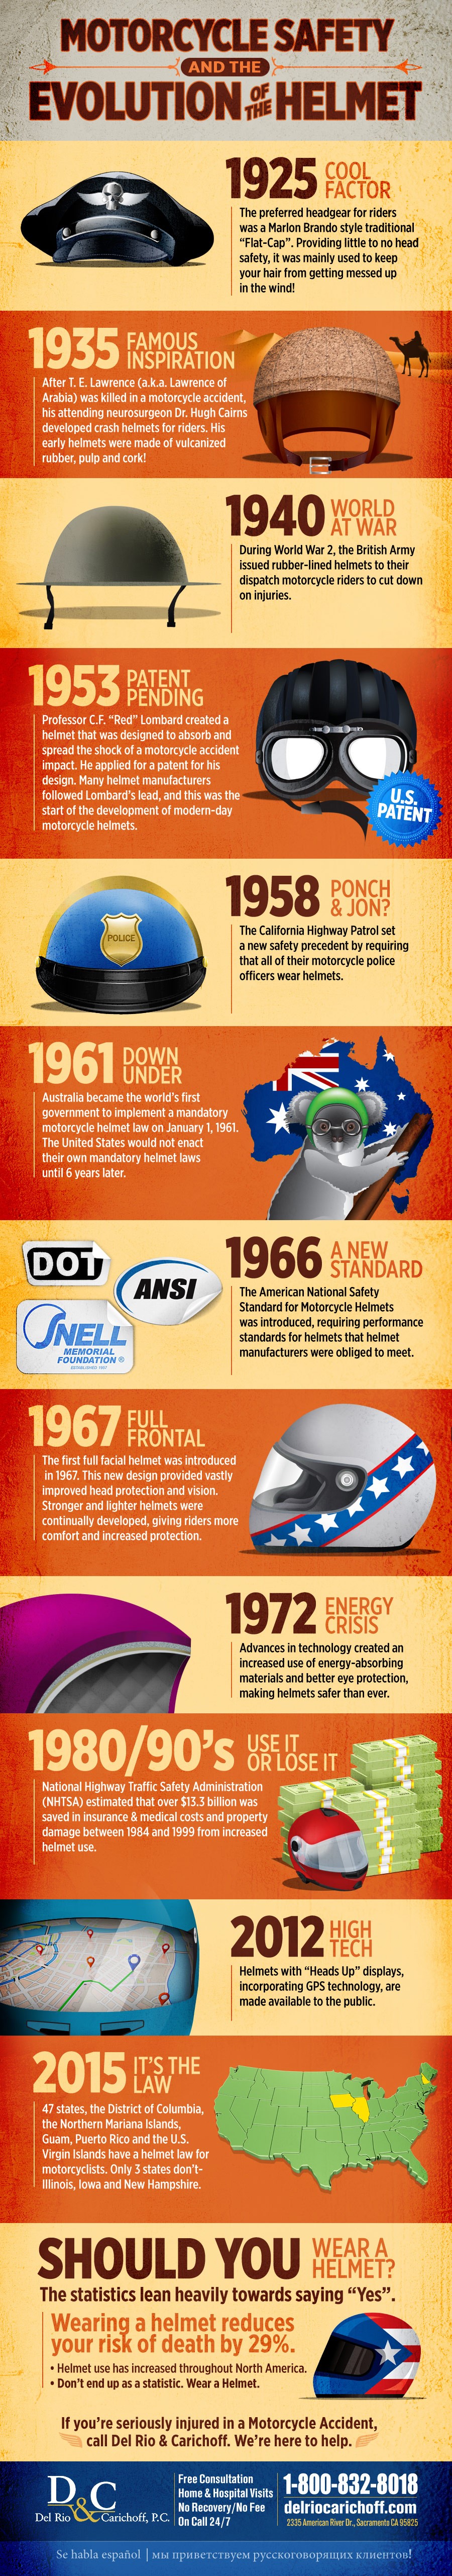 Motorcycle Safety and the Evolution of the Helmet